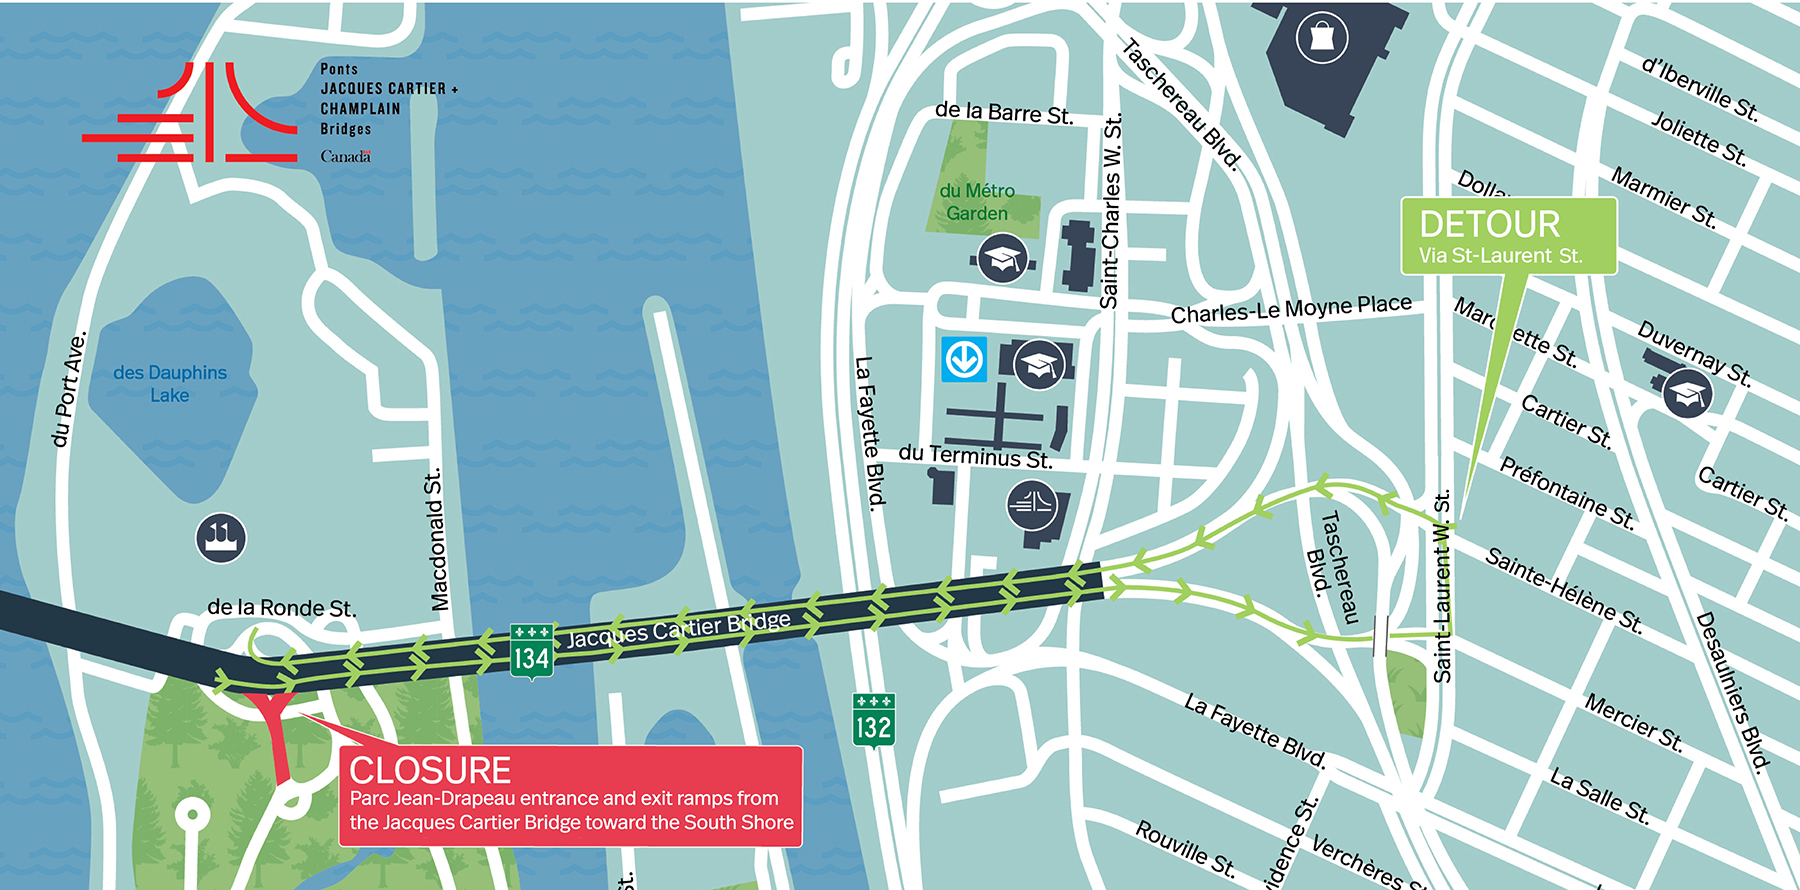 Jacques-Cartier Bridge | Complete closure of the access ramp to Jean-Drapeau Park toward South Shore on August 14 and 15